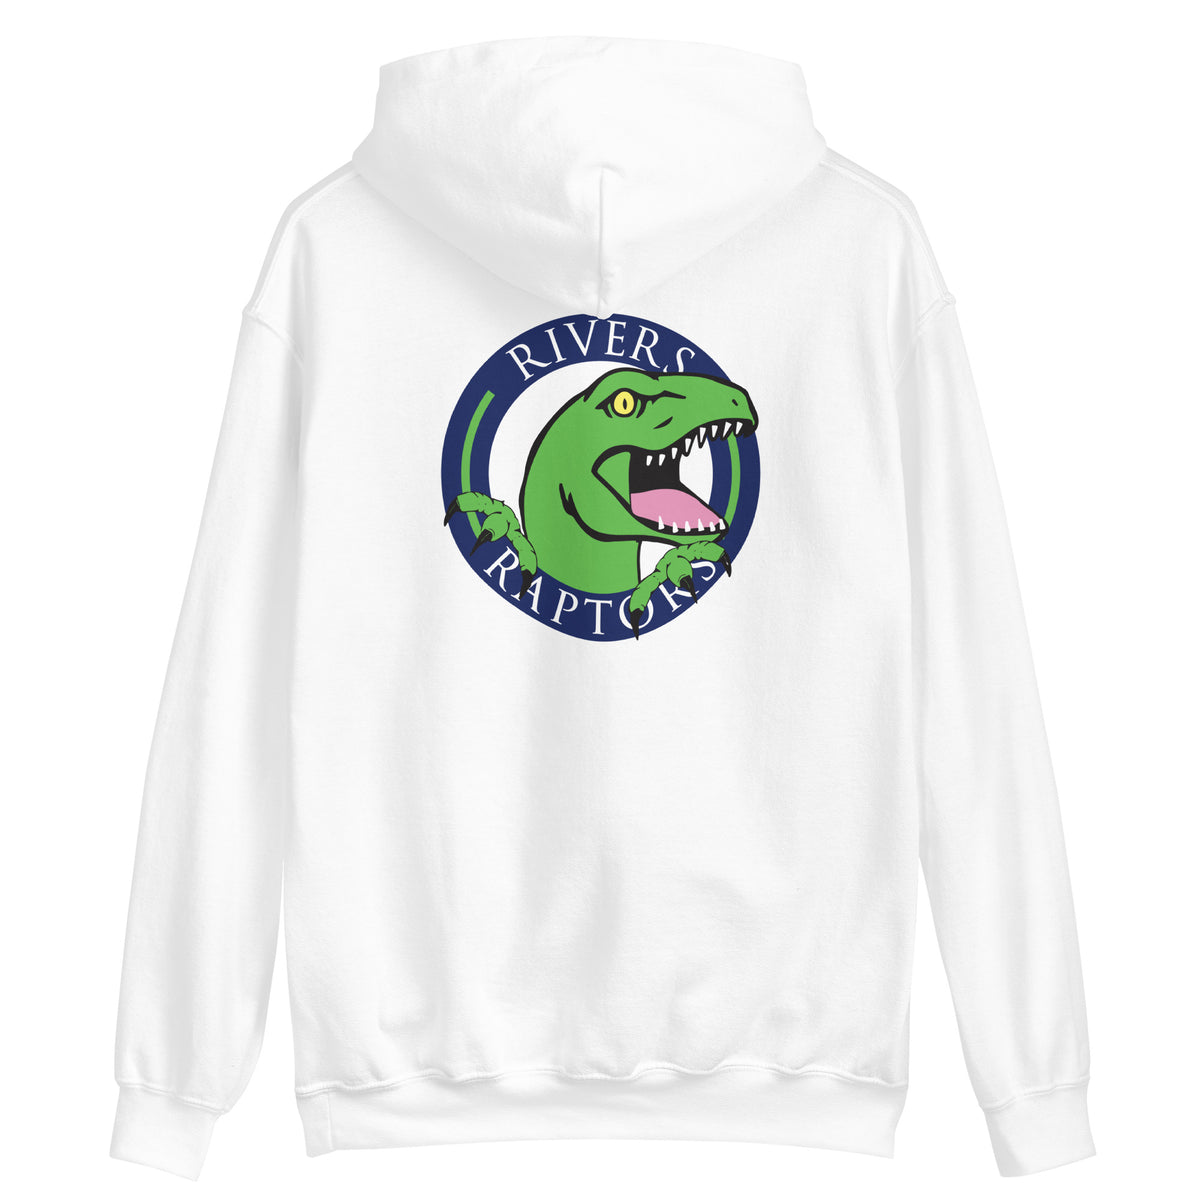 Rivers Academy Cross Country Team Classic Hoodie